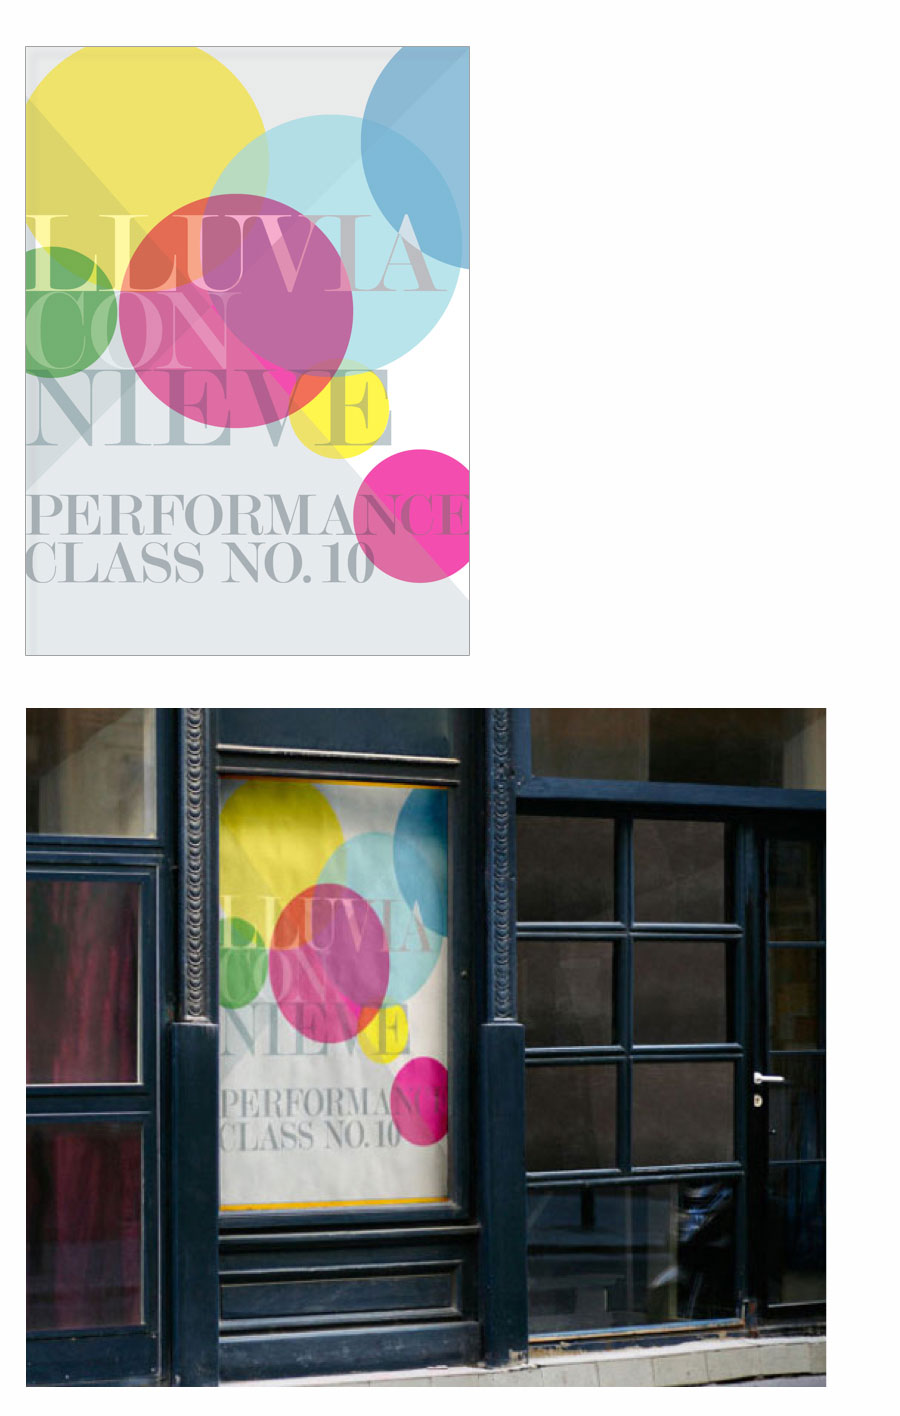 Poster that with abstract colors and type for a dance performance. Poster shown again in context of a display case on the outside of a building.